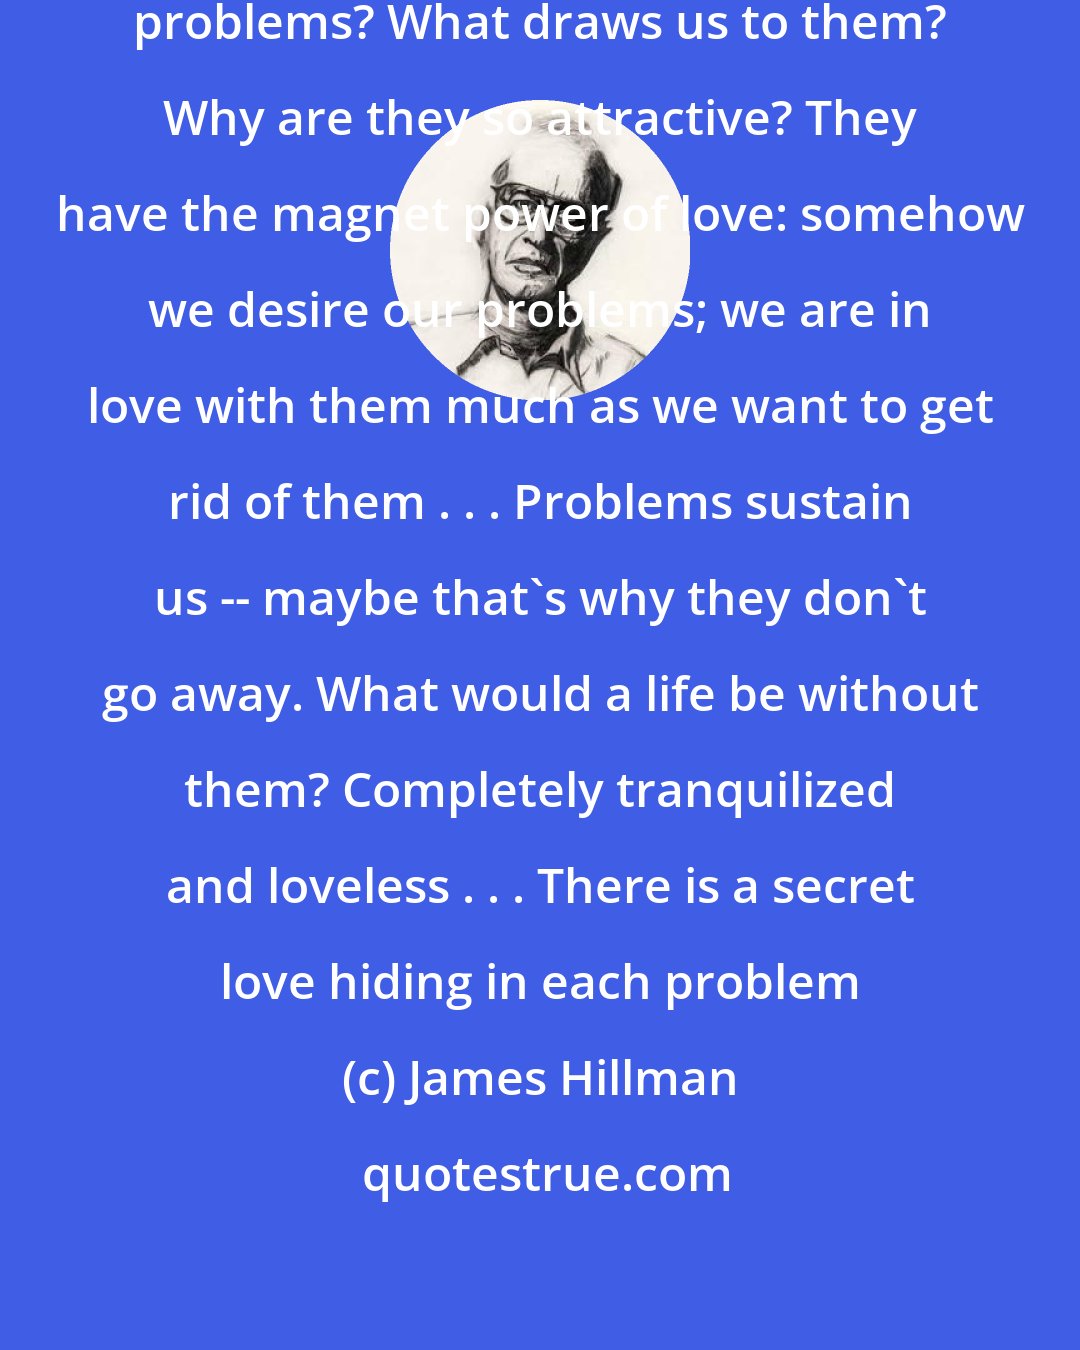 James Hillman: Why do we focus so intensely on our problems? What draws us to them? Why are they so attractive? They have the magnet power of love: somehow we desire our problems; we are in love with them much as we want to get rid of them . . . Problems sustain us -- maybe that's why they don't go away. What would a life be without them? Completely tranquilized and loveless . . . There is a secret love hiding in each problem